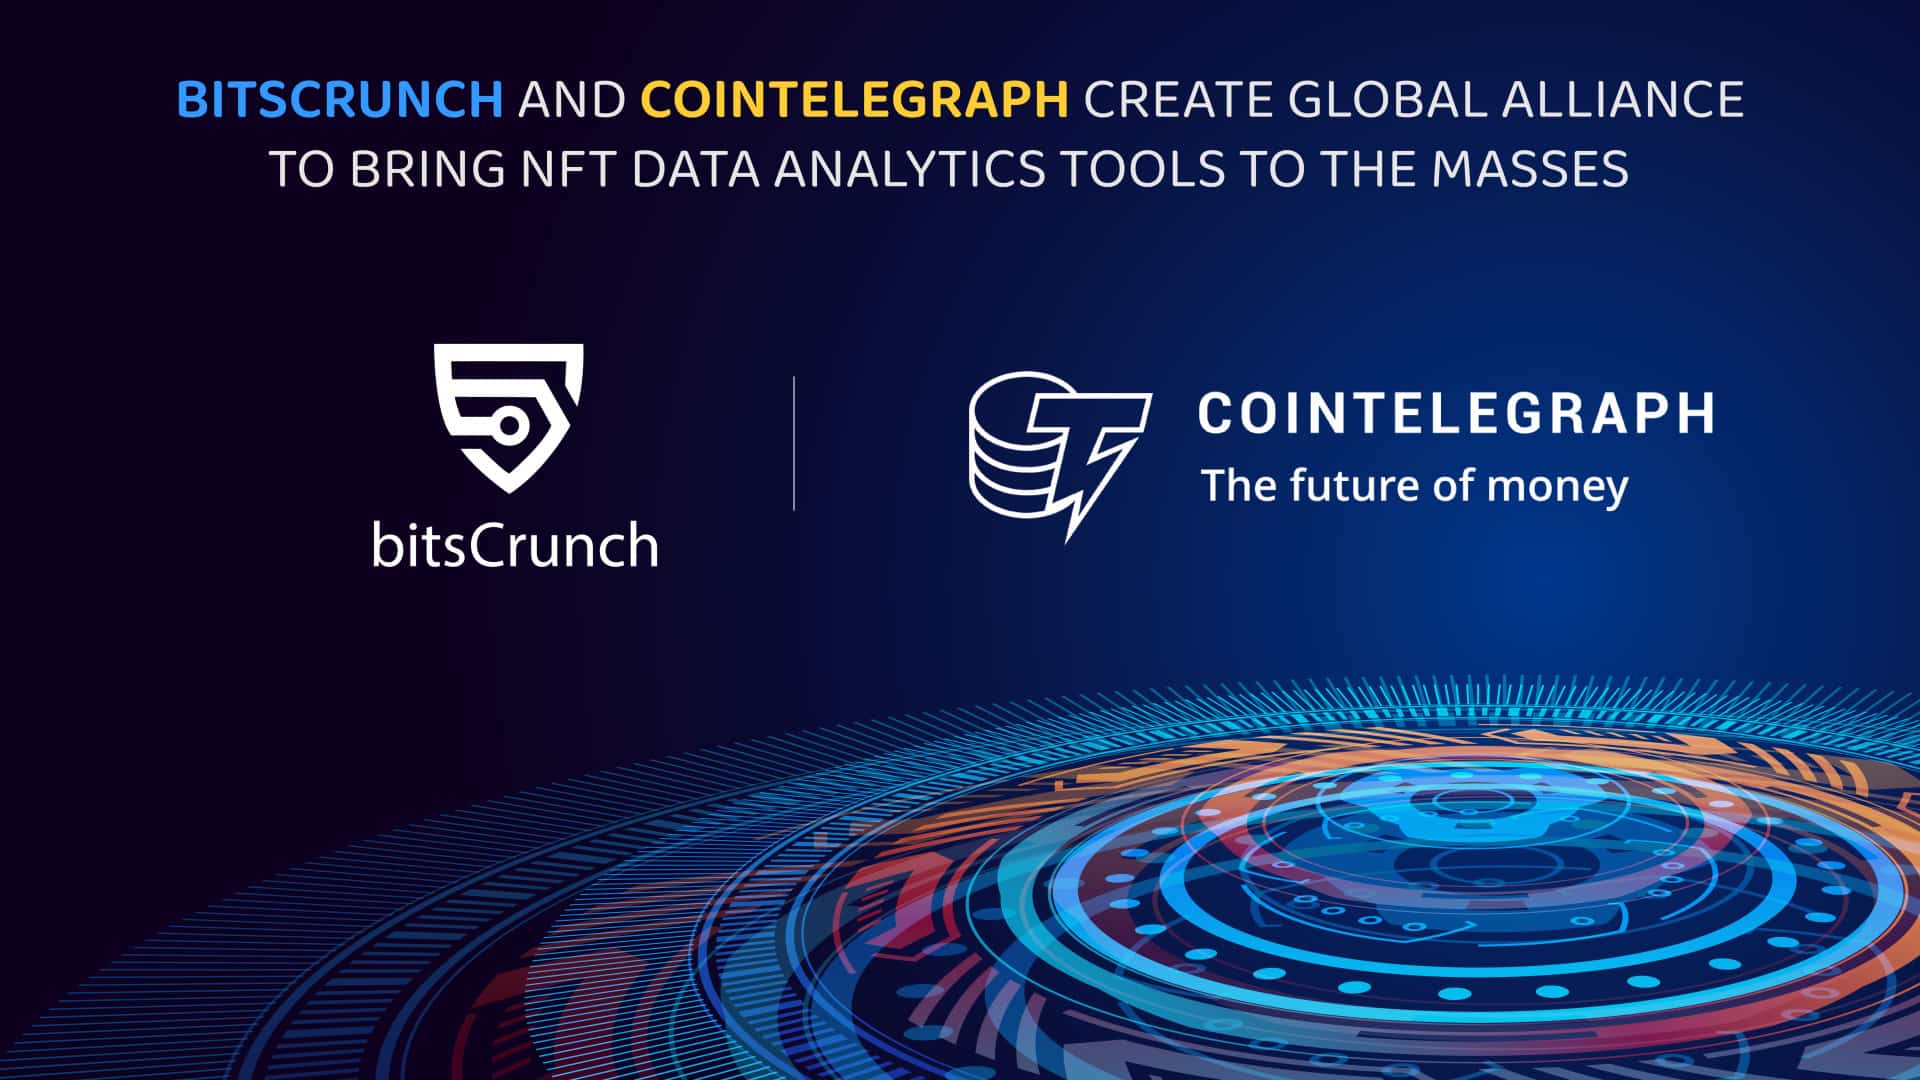 bitsCrunch and Cointelegraph Create Global Alliance to Develop NFT Data Analytics Tools